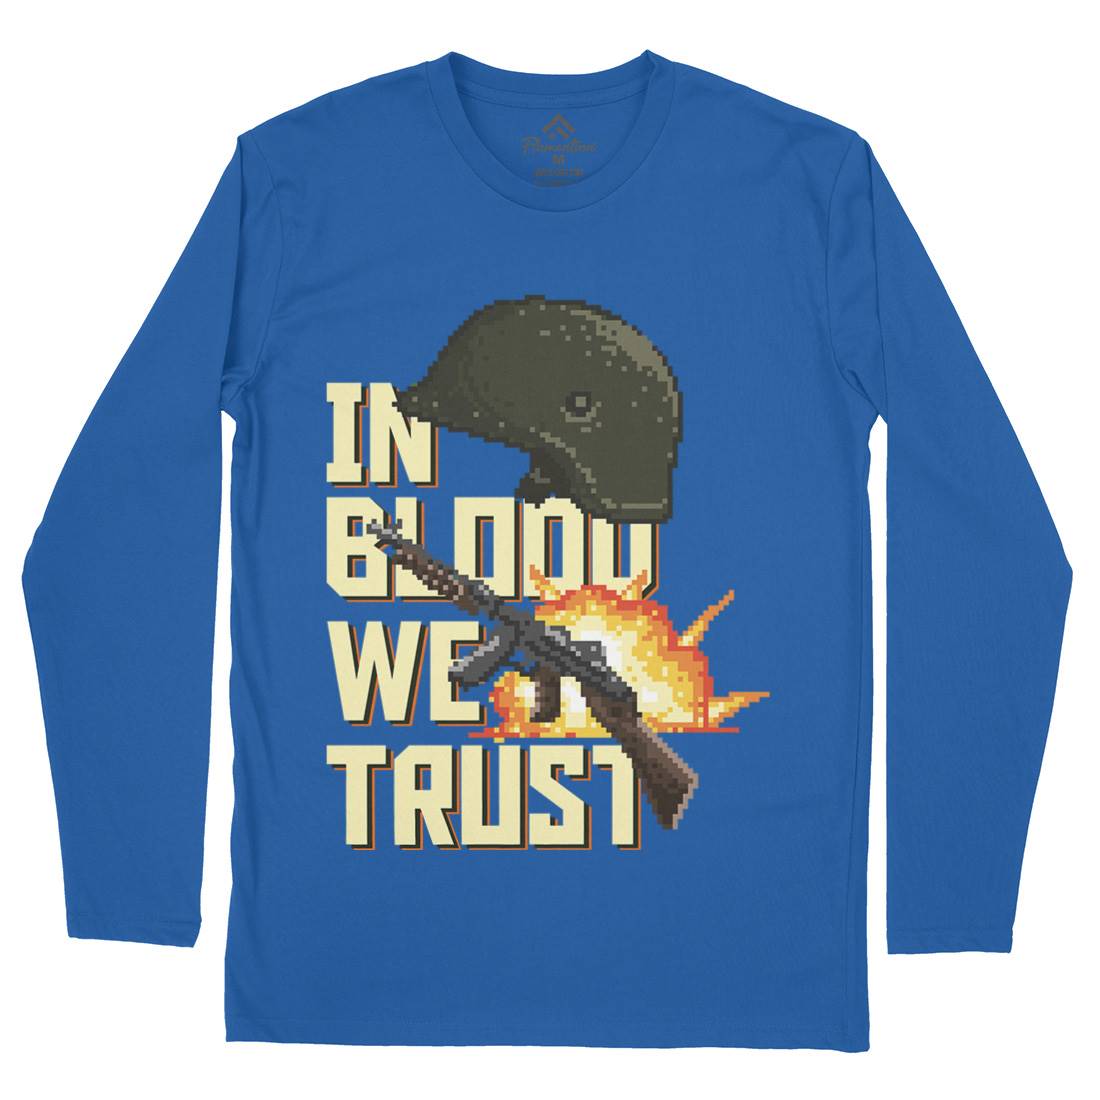 In Blood We Trust Mens Long Sleeve T-Shirt Army B918